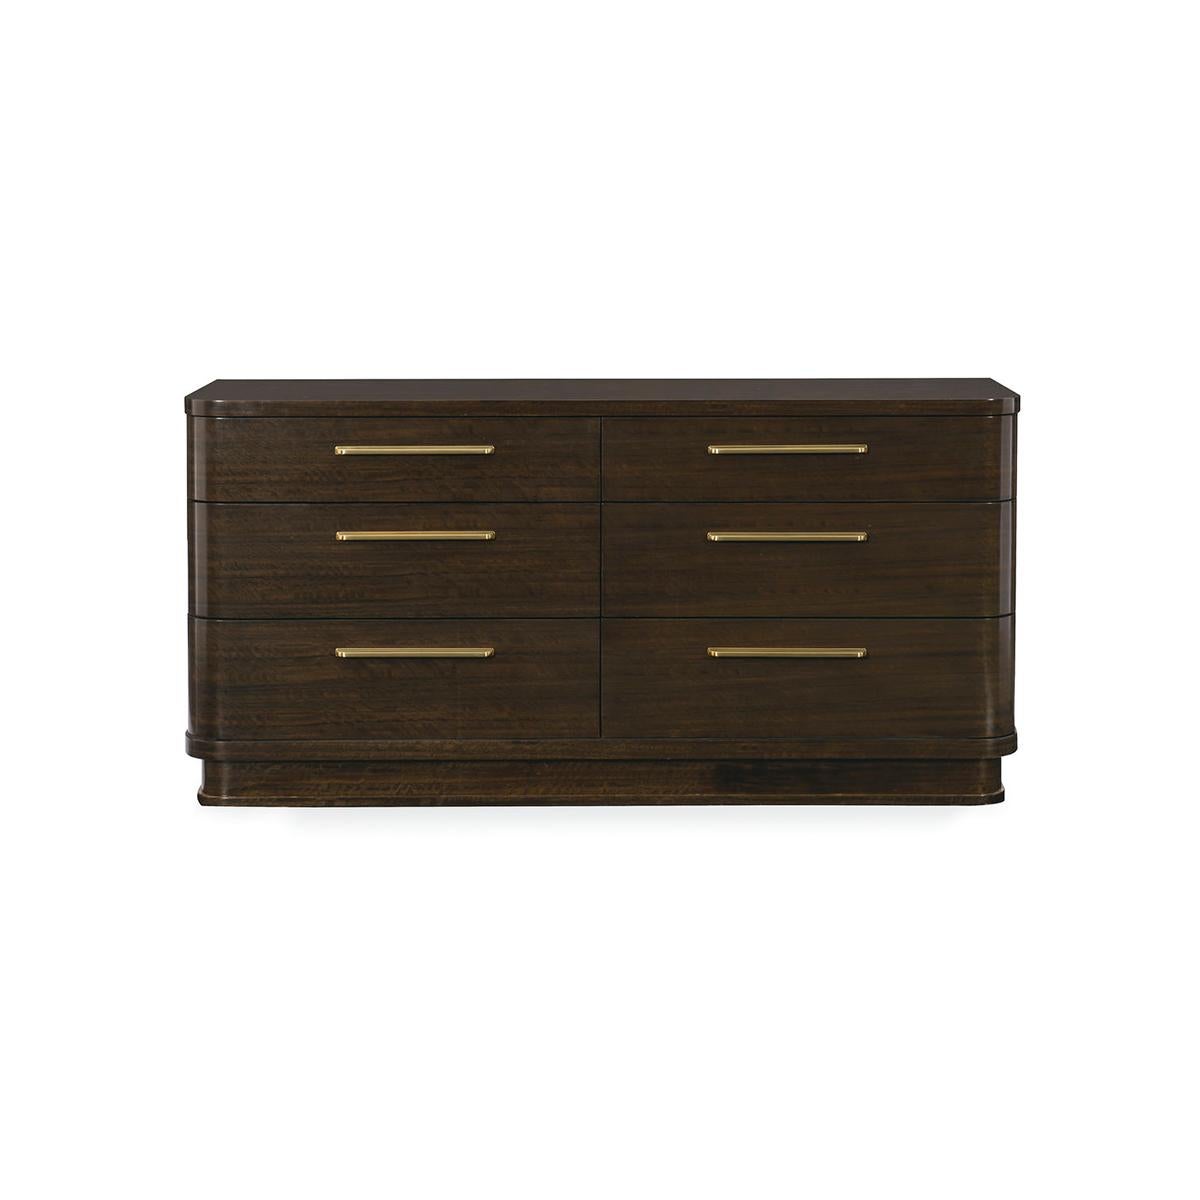 Classic era details come to life in this contemporized six-drawer dresser. Distinguished by its generously rounded corners, and recessed plinth base, this piece takes on a refreshed style in fumed figured eucalyptus that has been finished in Aged